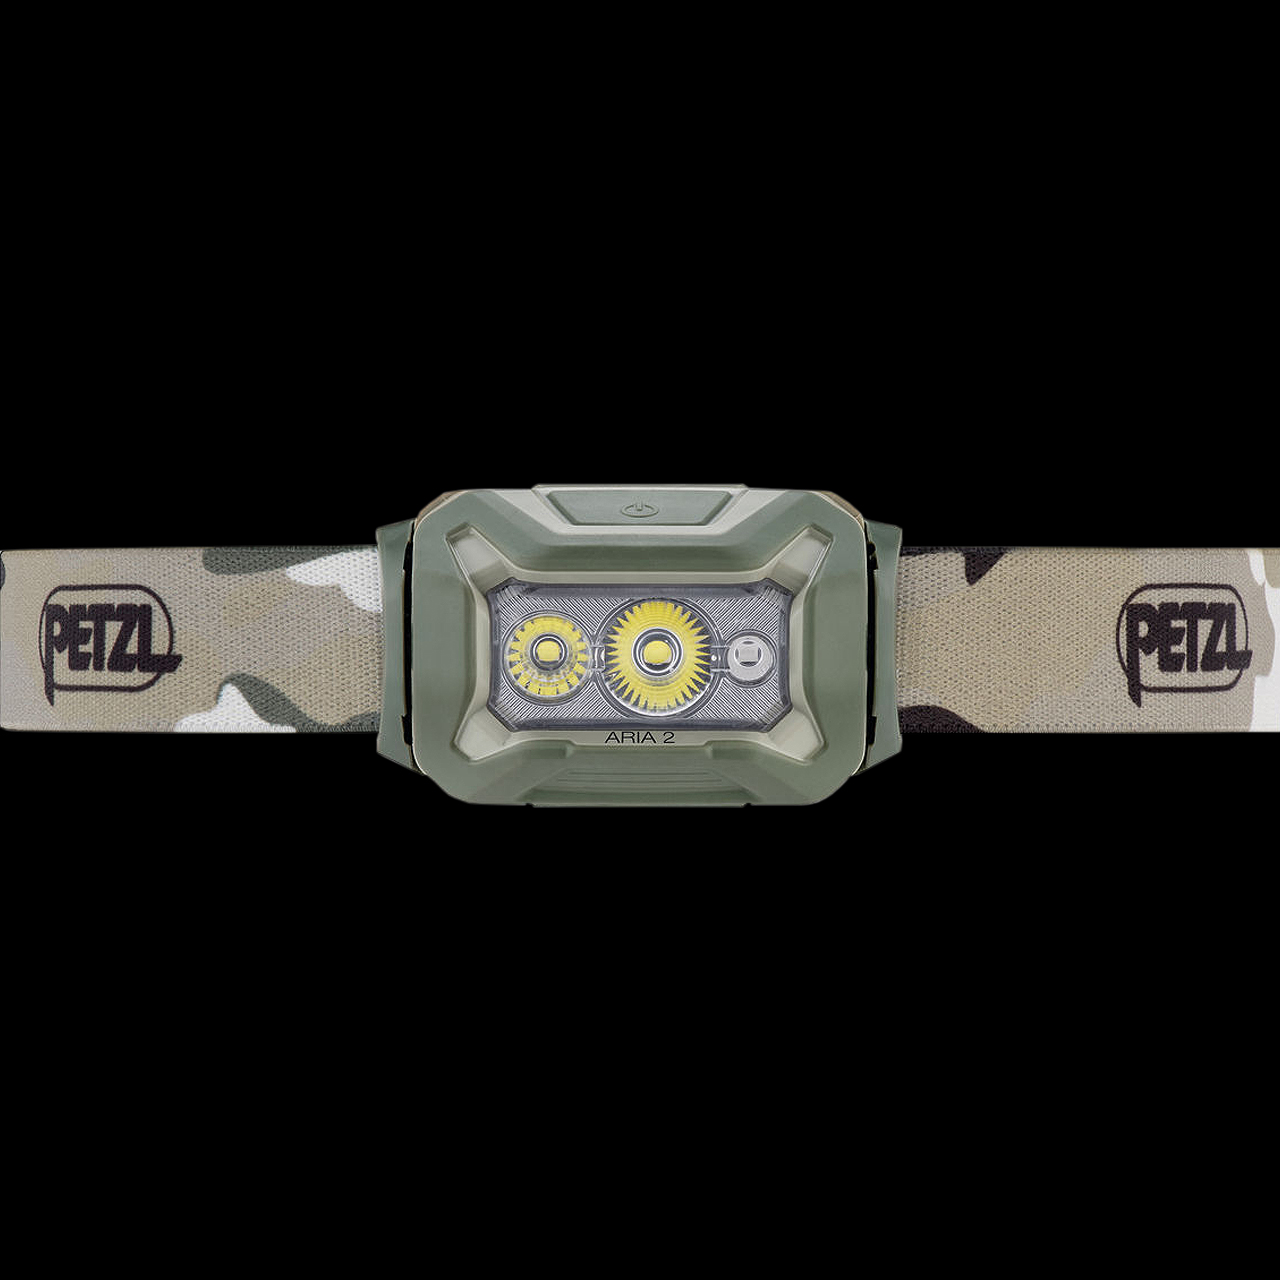 Lampe frontale Petzl Aria 2 RGB 450 lm